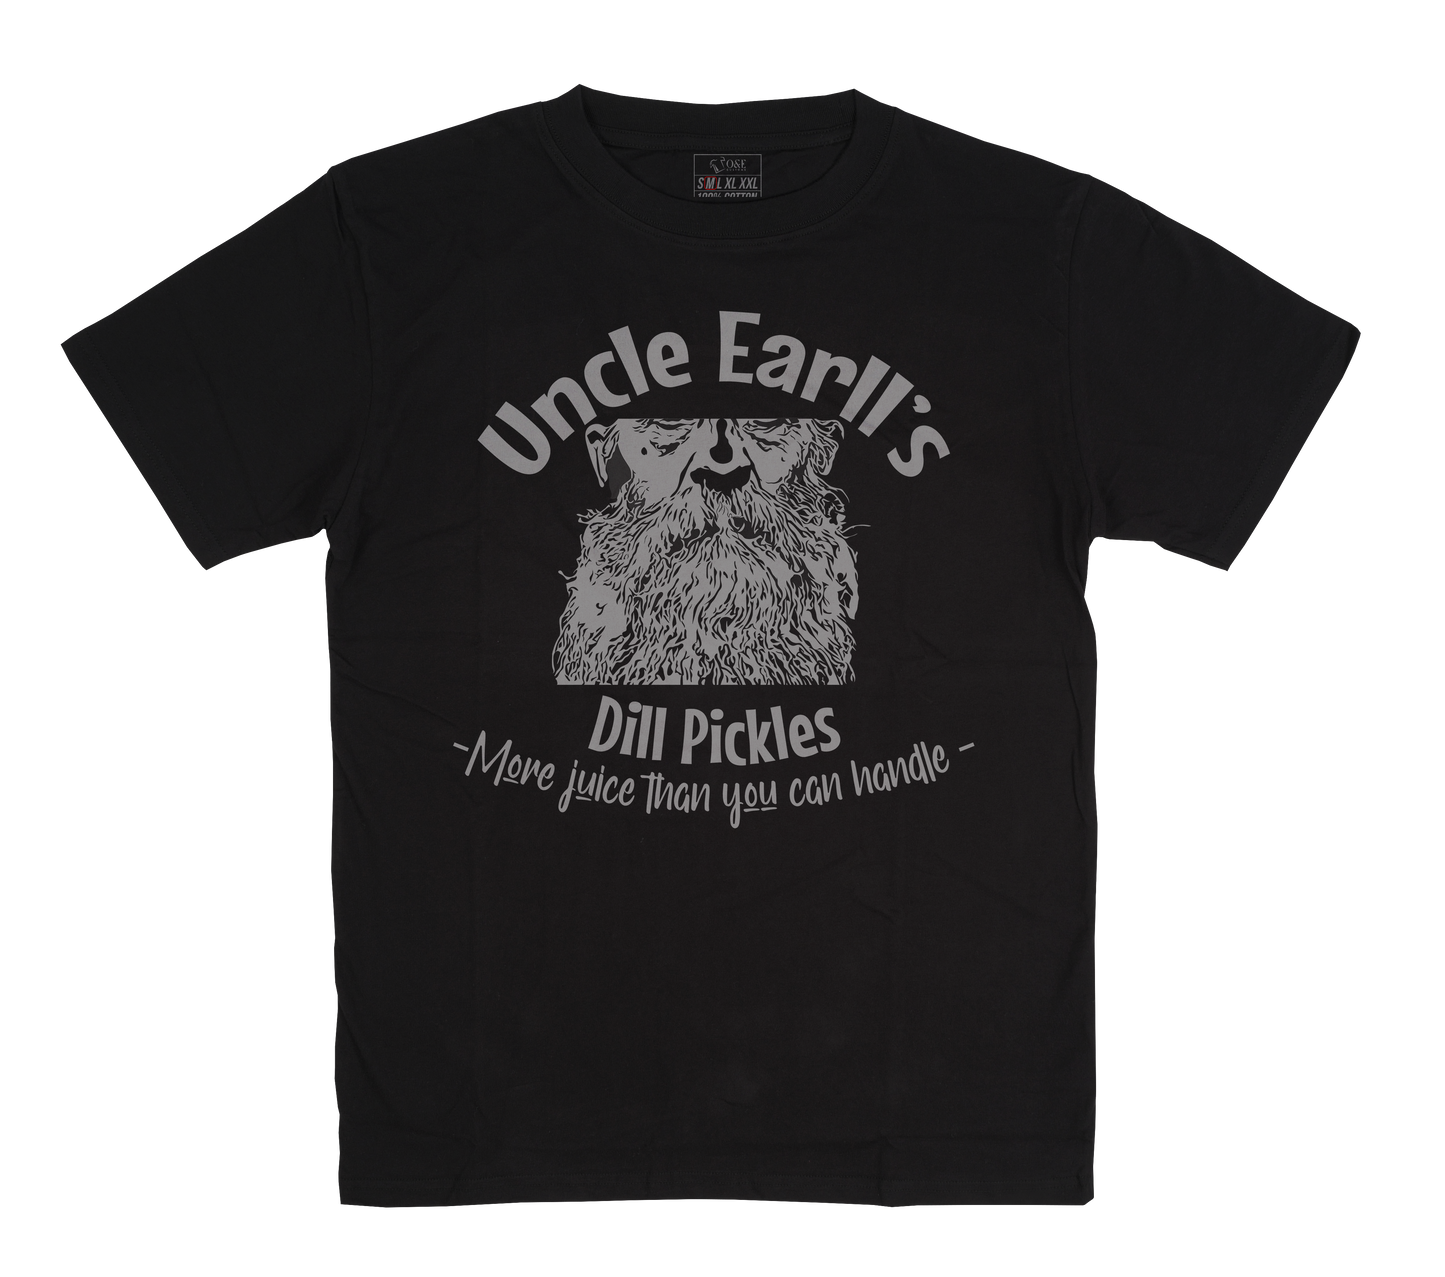 Uncle Earll's Dill Pickles T-Shirt - Black